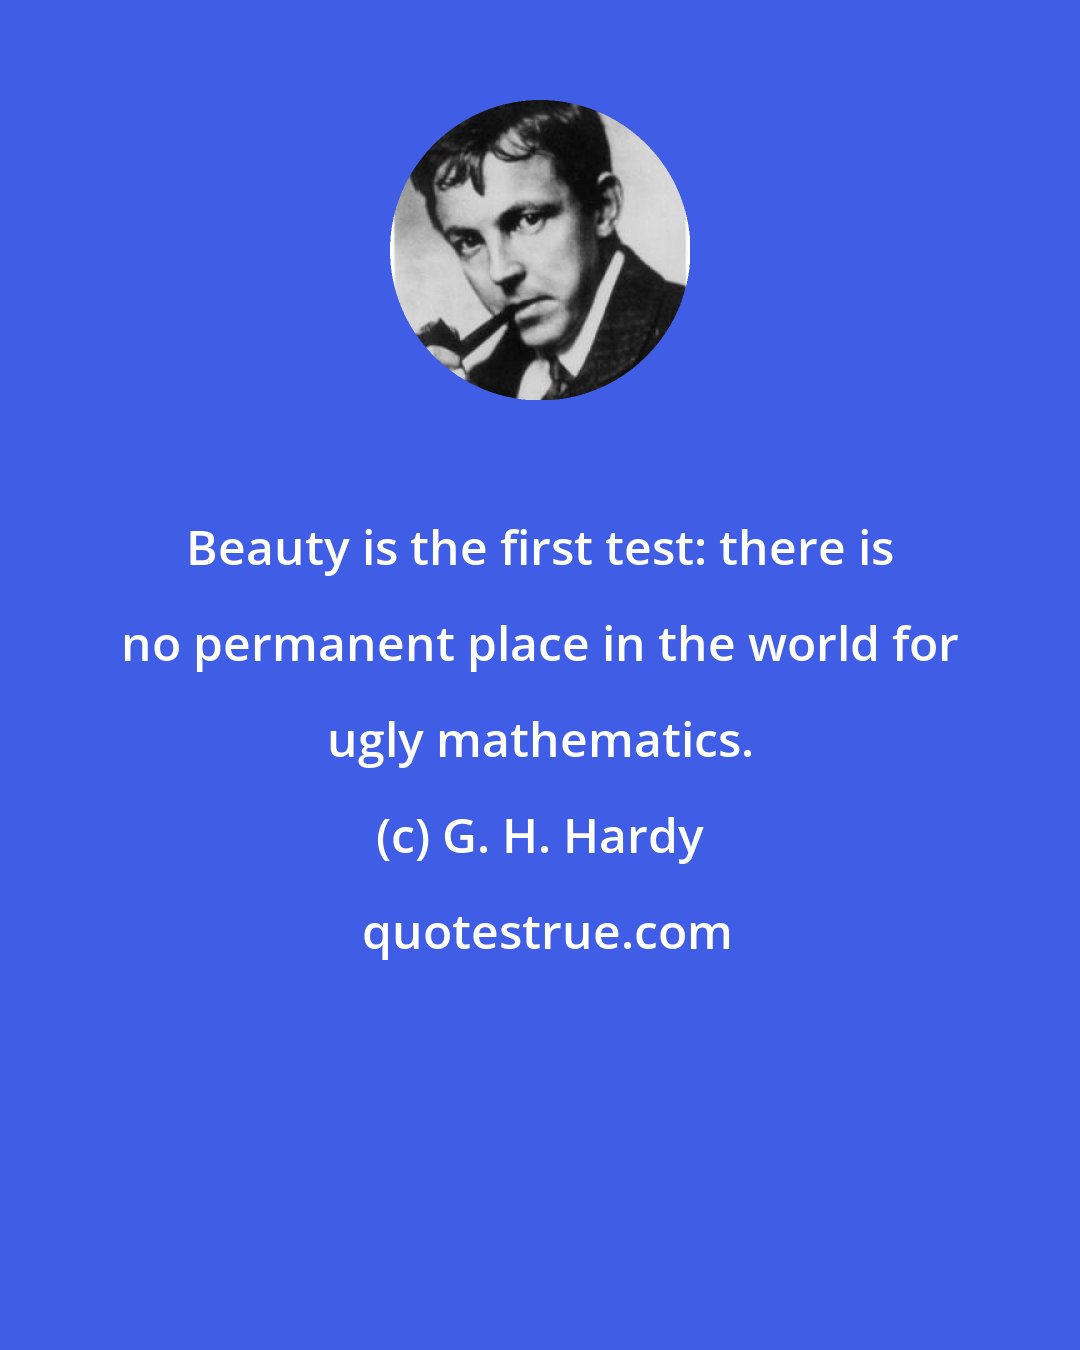 G. H. Hardy: Beauty is the first test: there is no permanent place in the world for ugly mathematics.